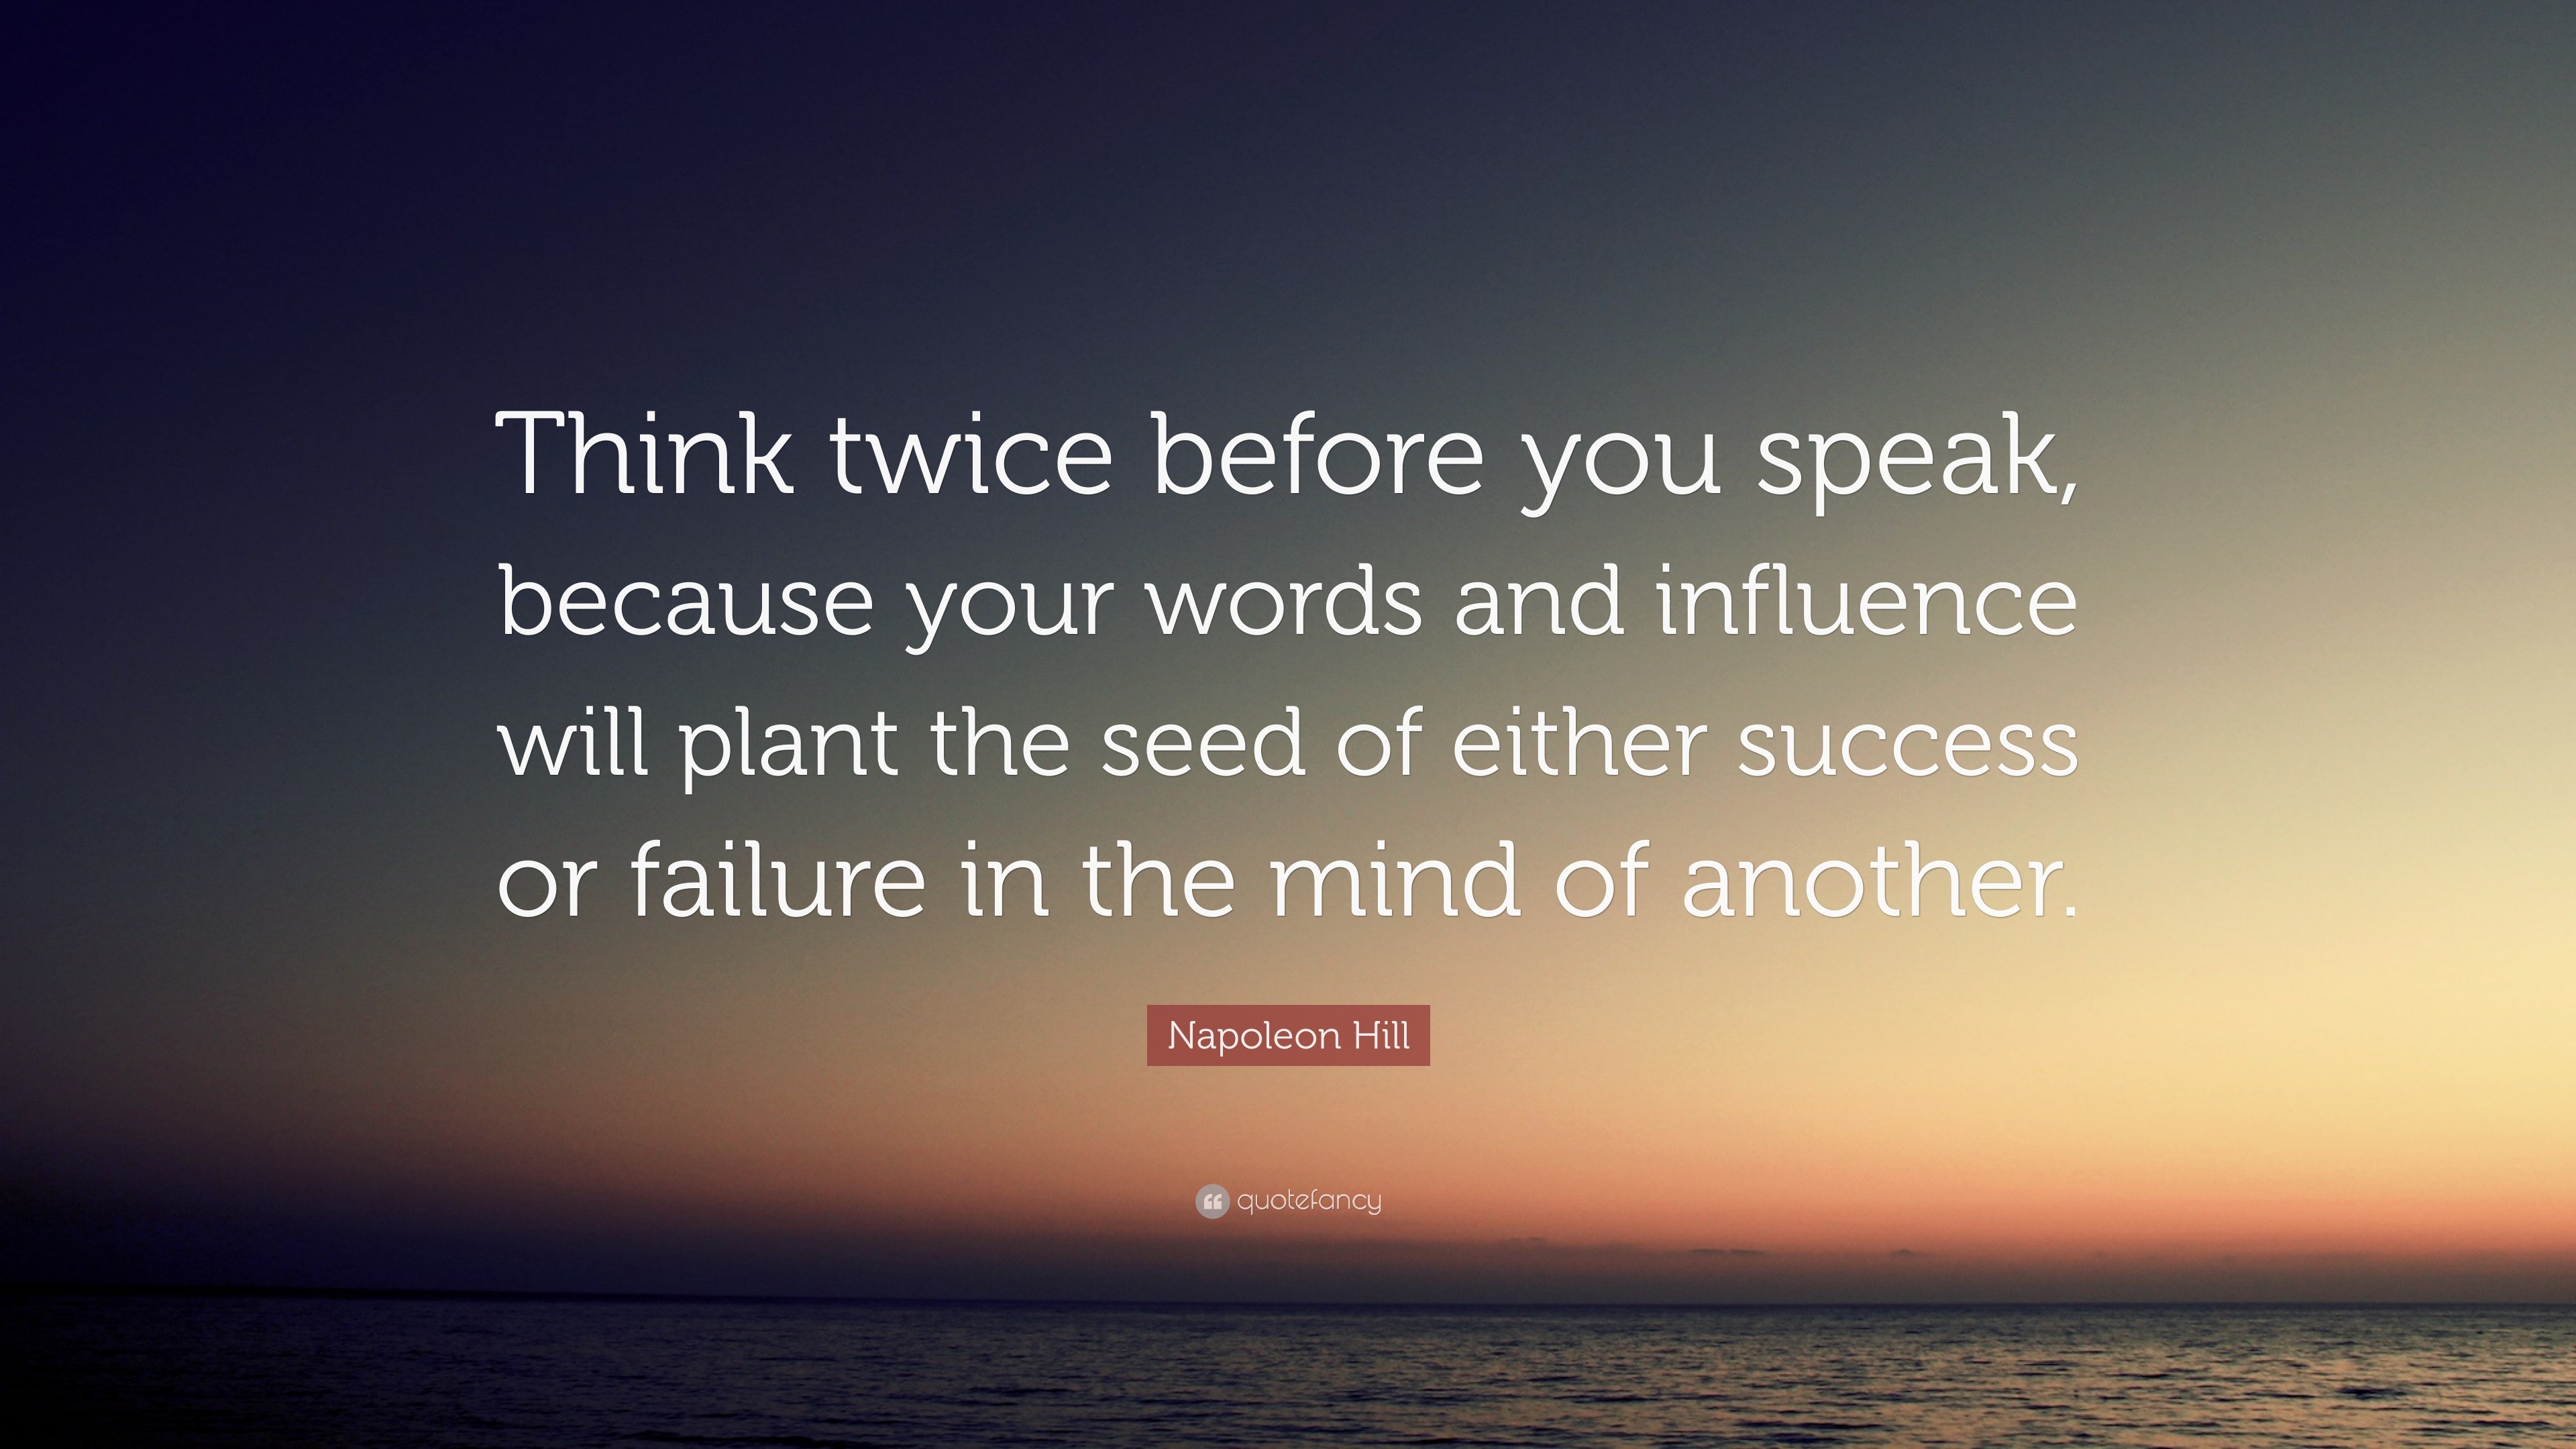 Napoleon Hill Quote: "Think twice before you speak, because your words and influence will plant ...